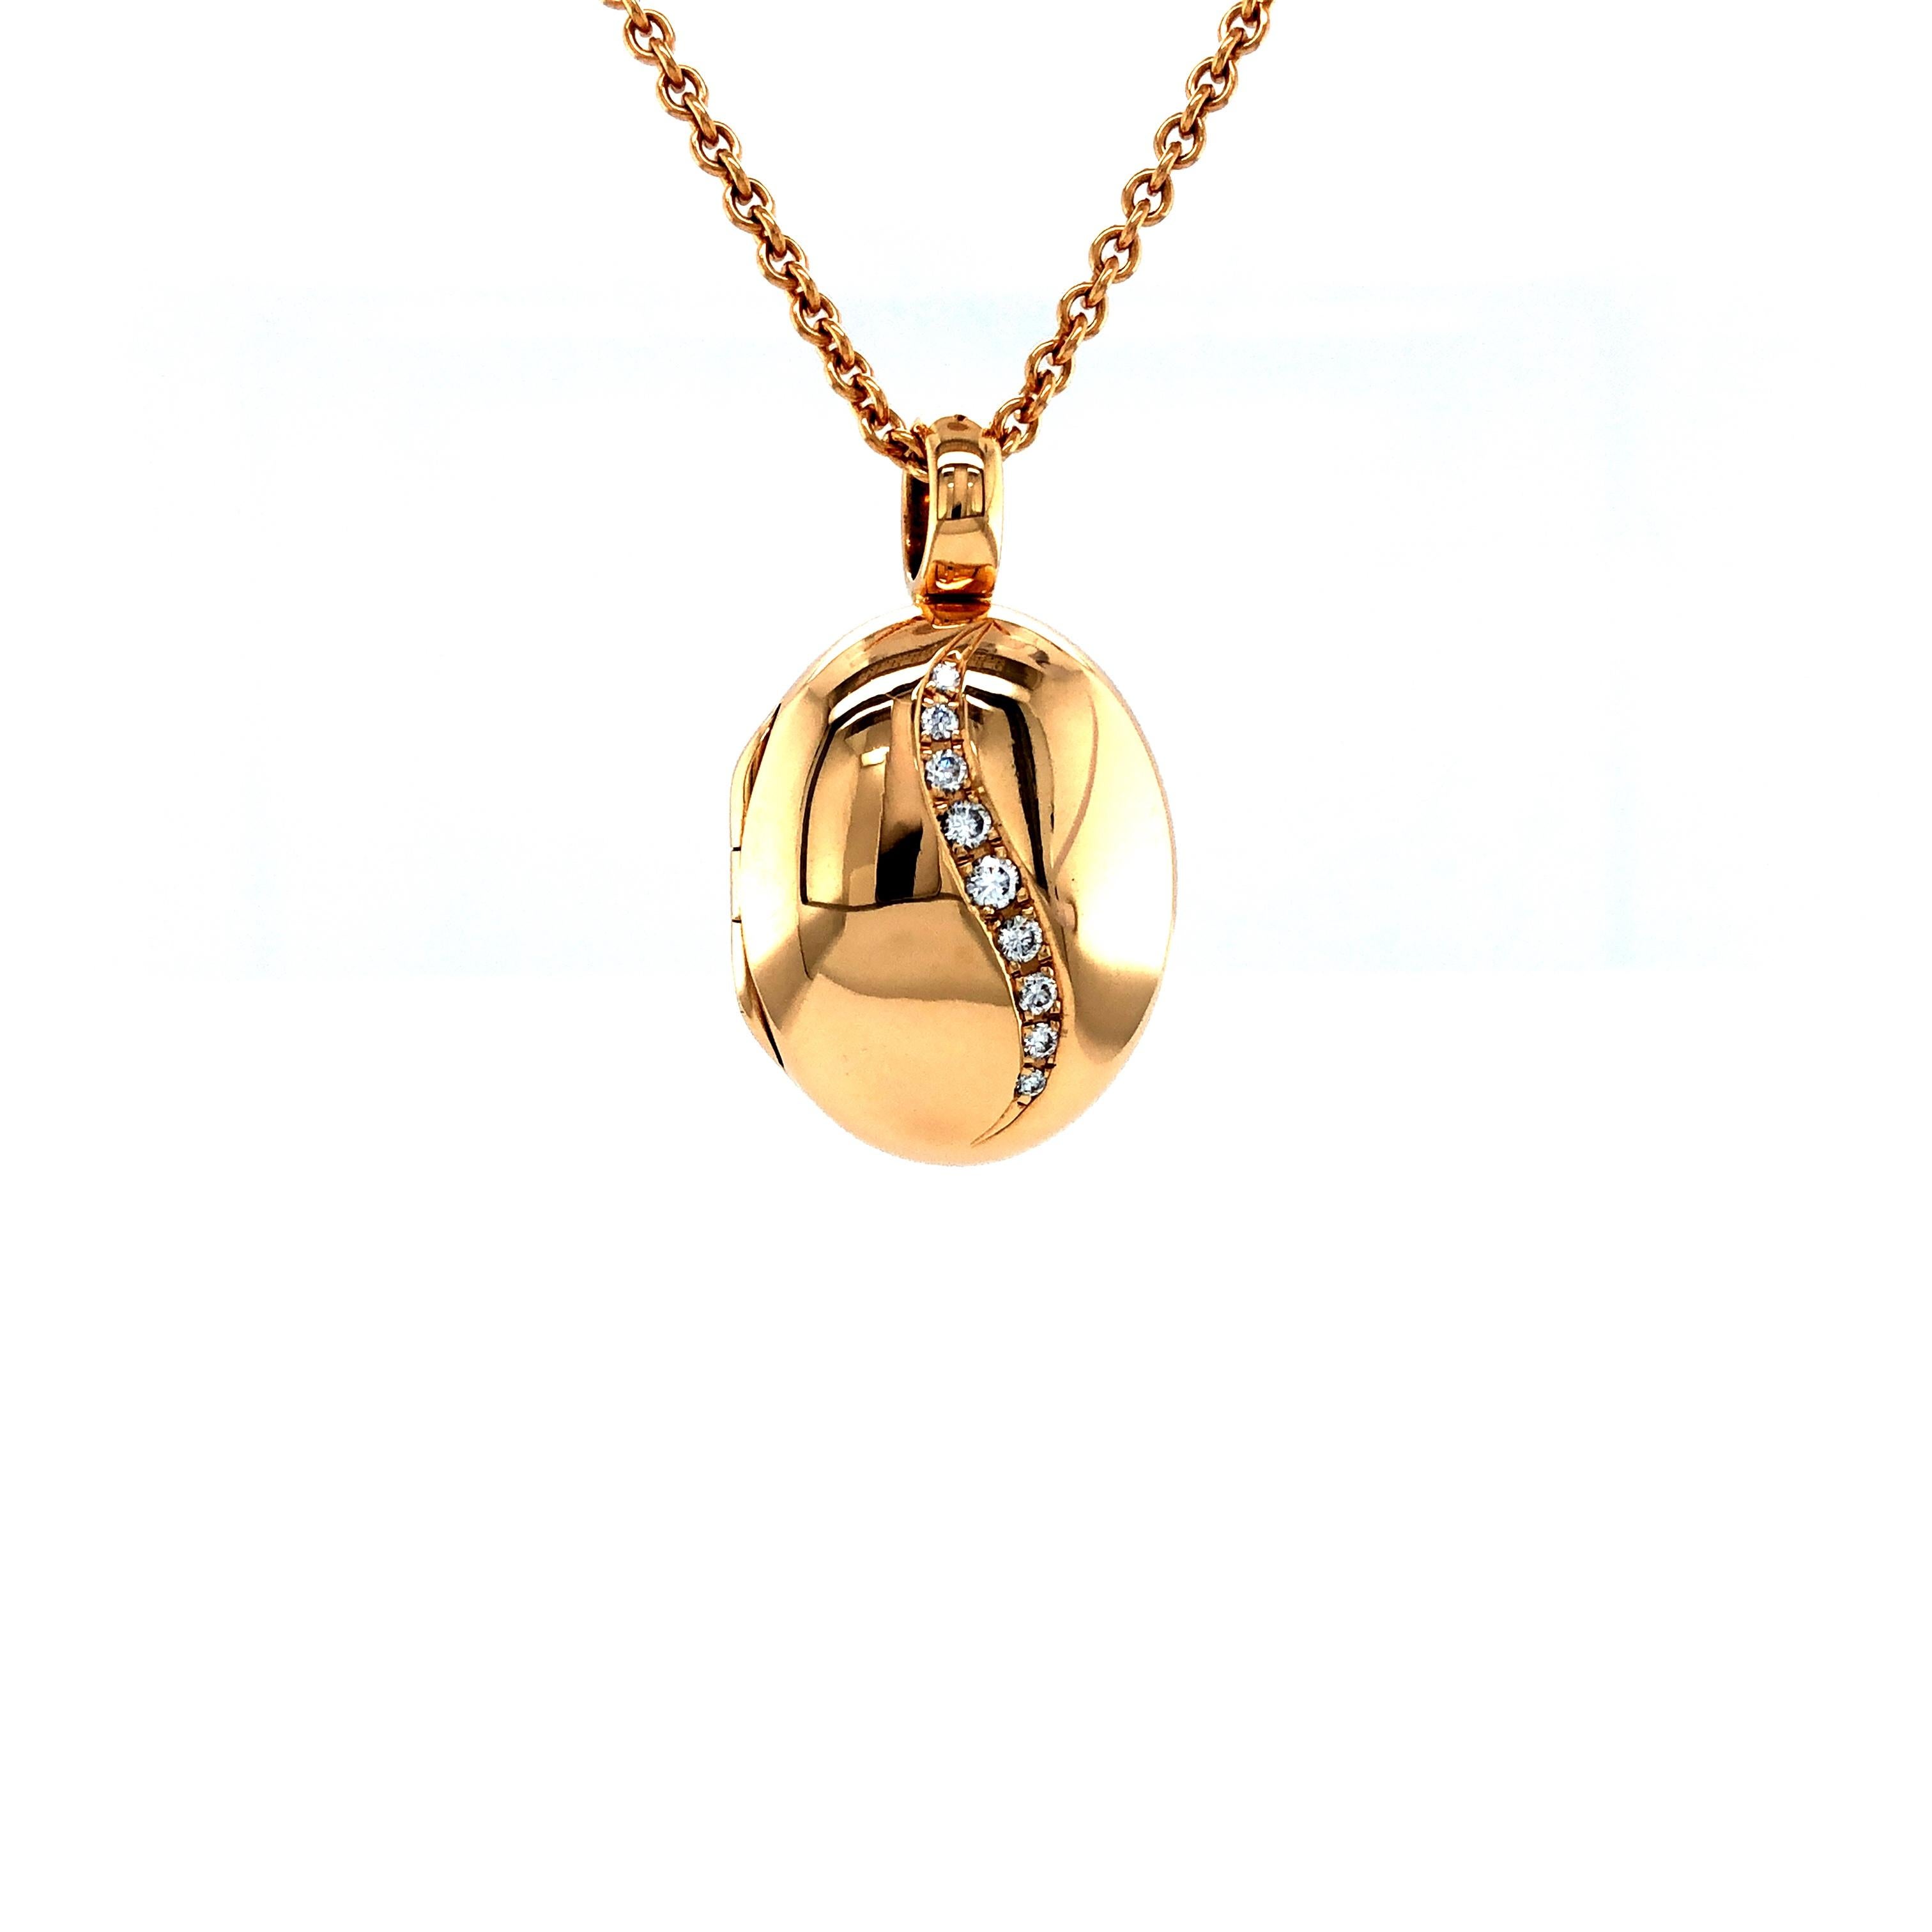 Victor Mayer customizable polished oval locket pendant 18k rose gold, Hallmark Collection, 9 diamonds, total 0.13 ct, H VS, measurements app. 20.0 mm x 17.0 mm

About the creator Victor Mayer
Victor Mayer is internationally renowned for elegant